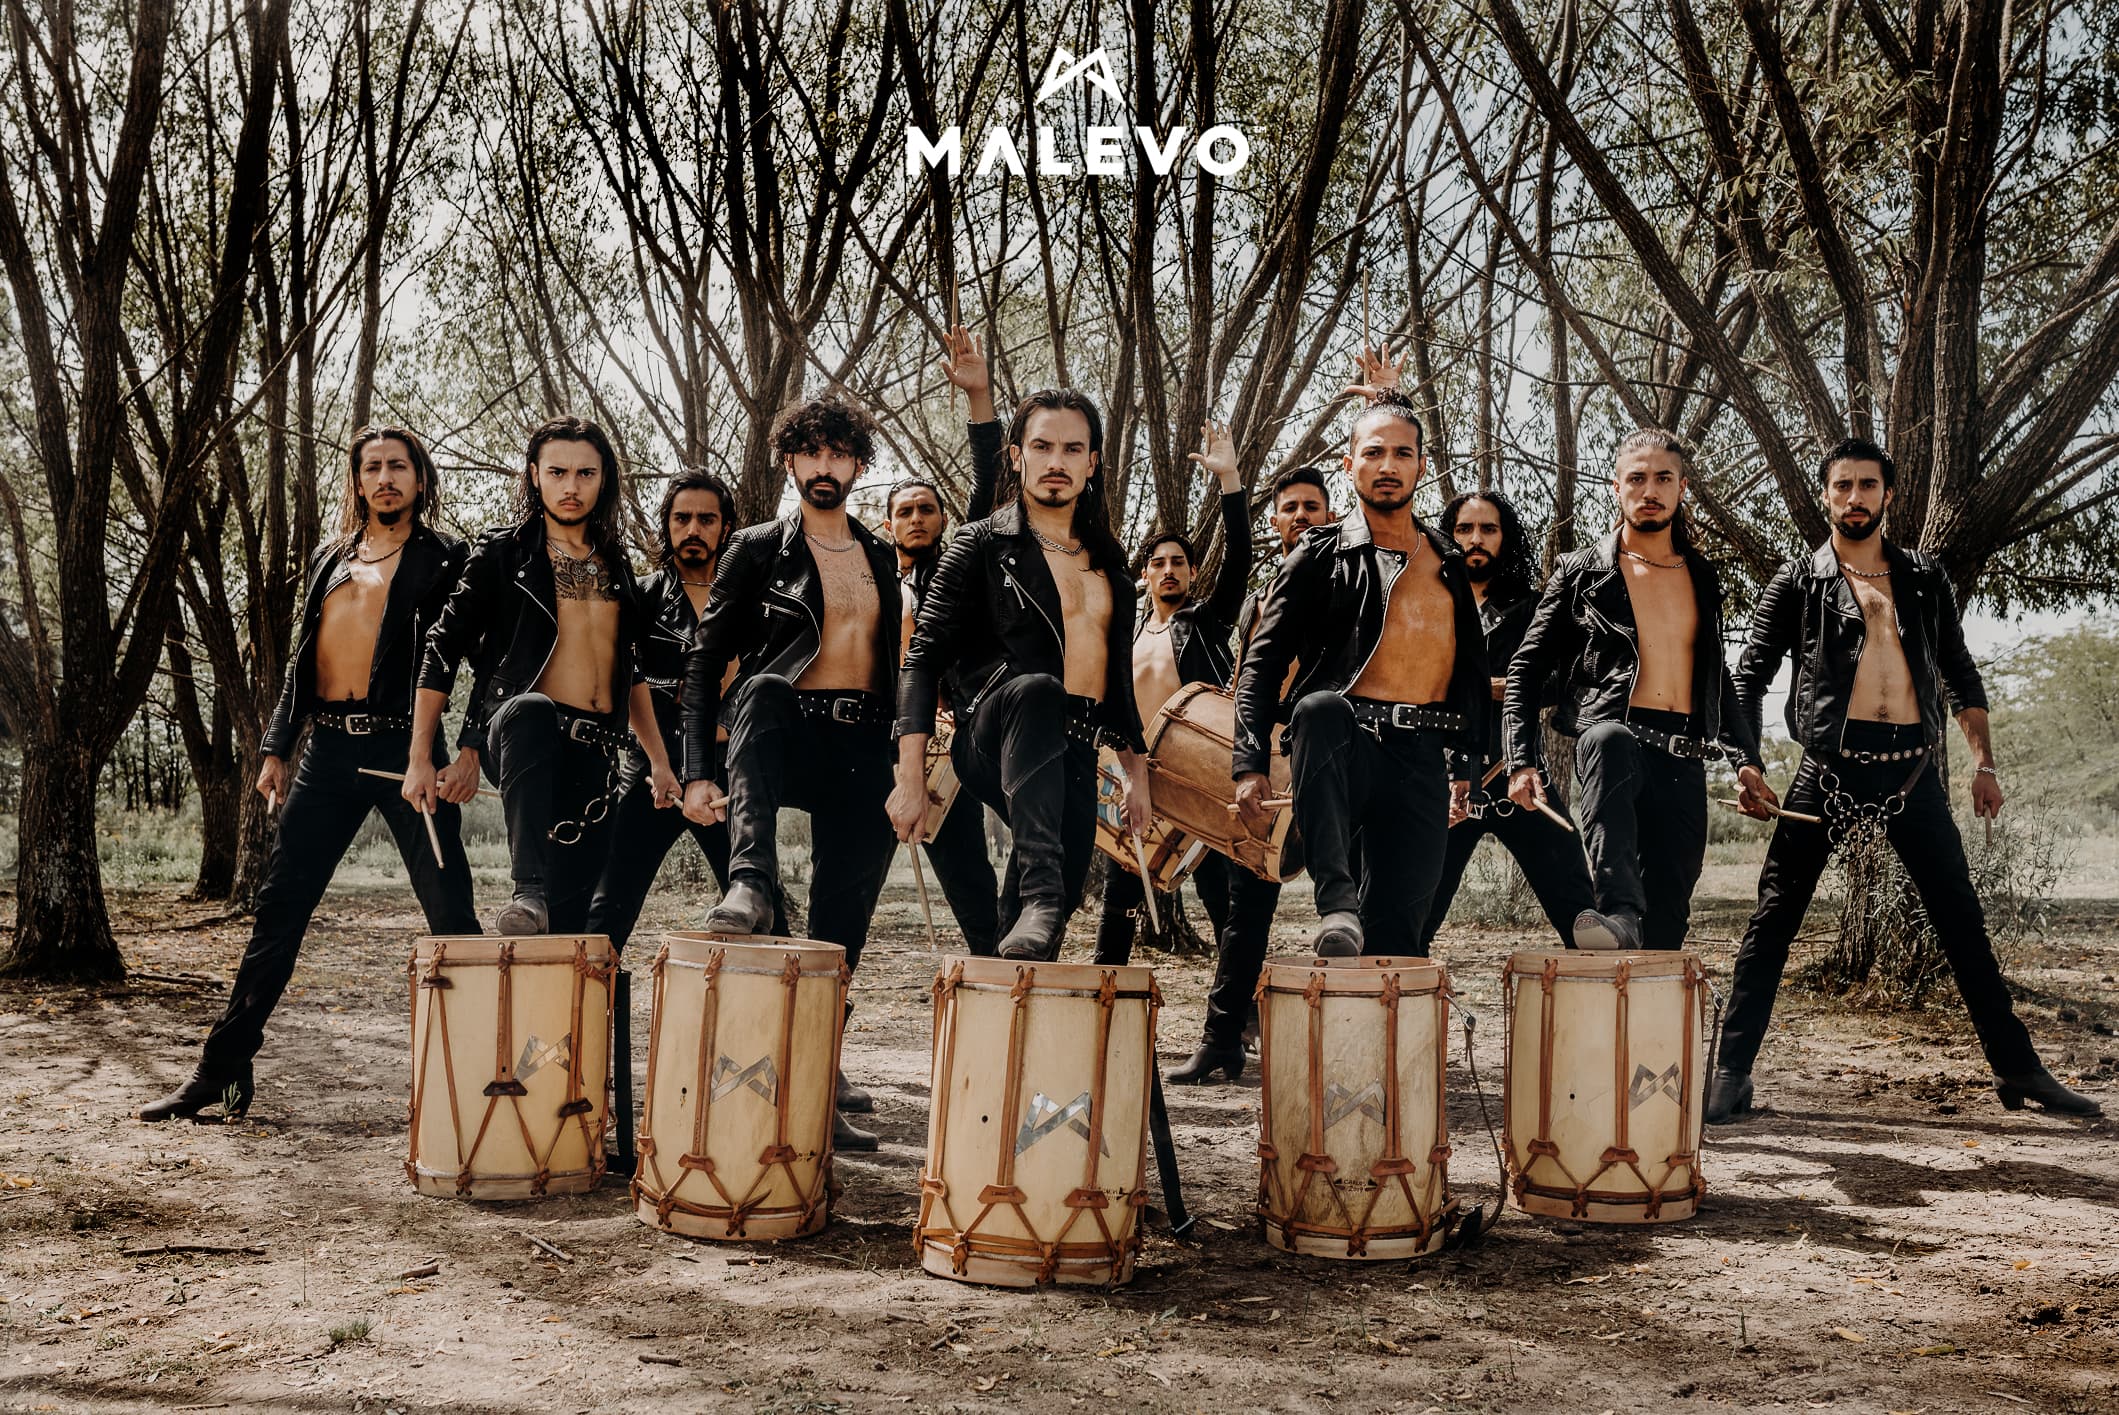 A photo of the twelve members of Malevo all dressed in black standing with their drums